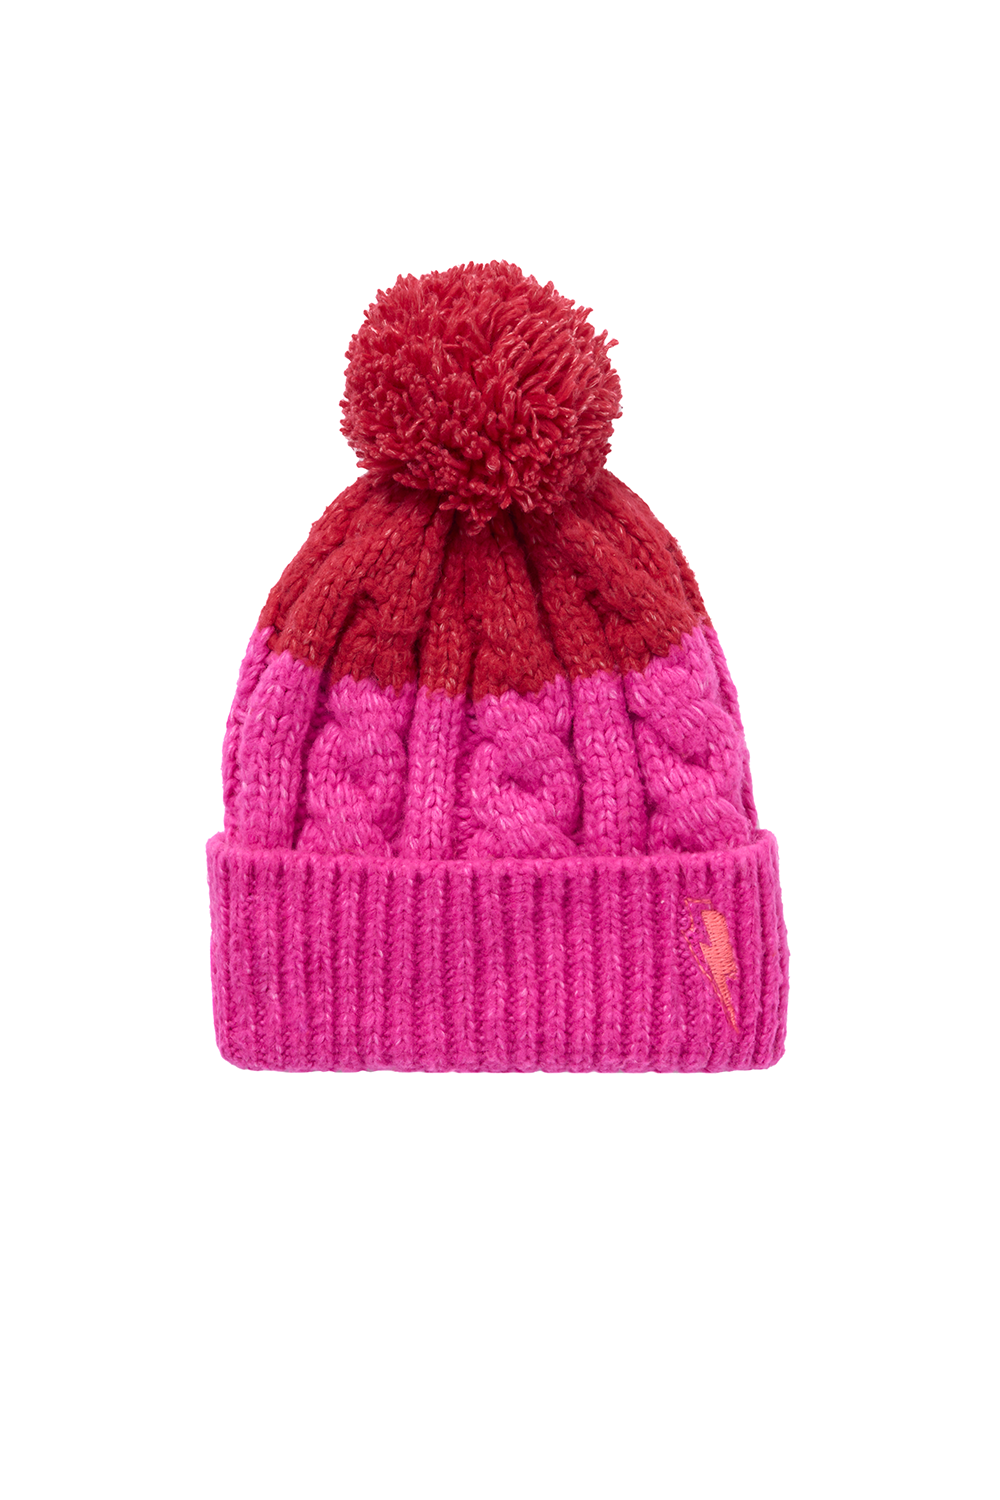 Red with Pink Cable Knit Bobble Hat